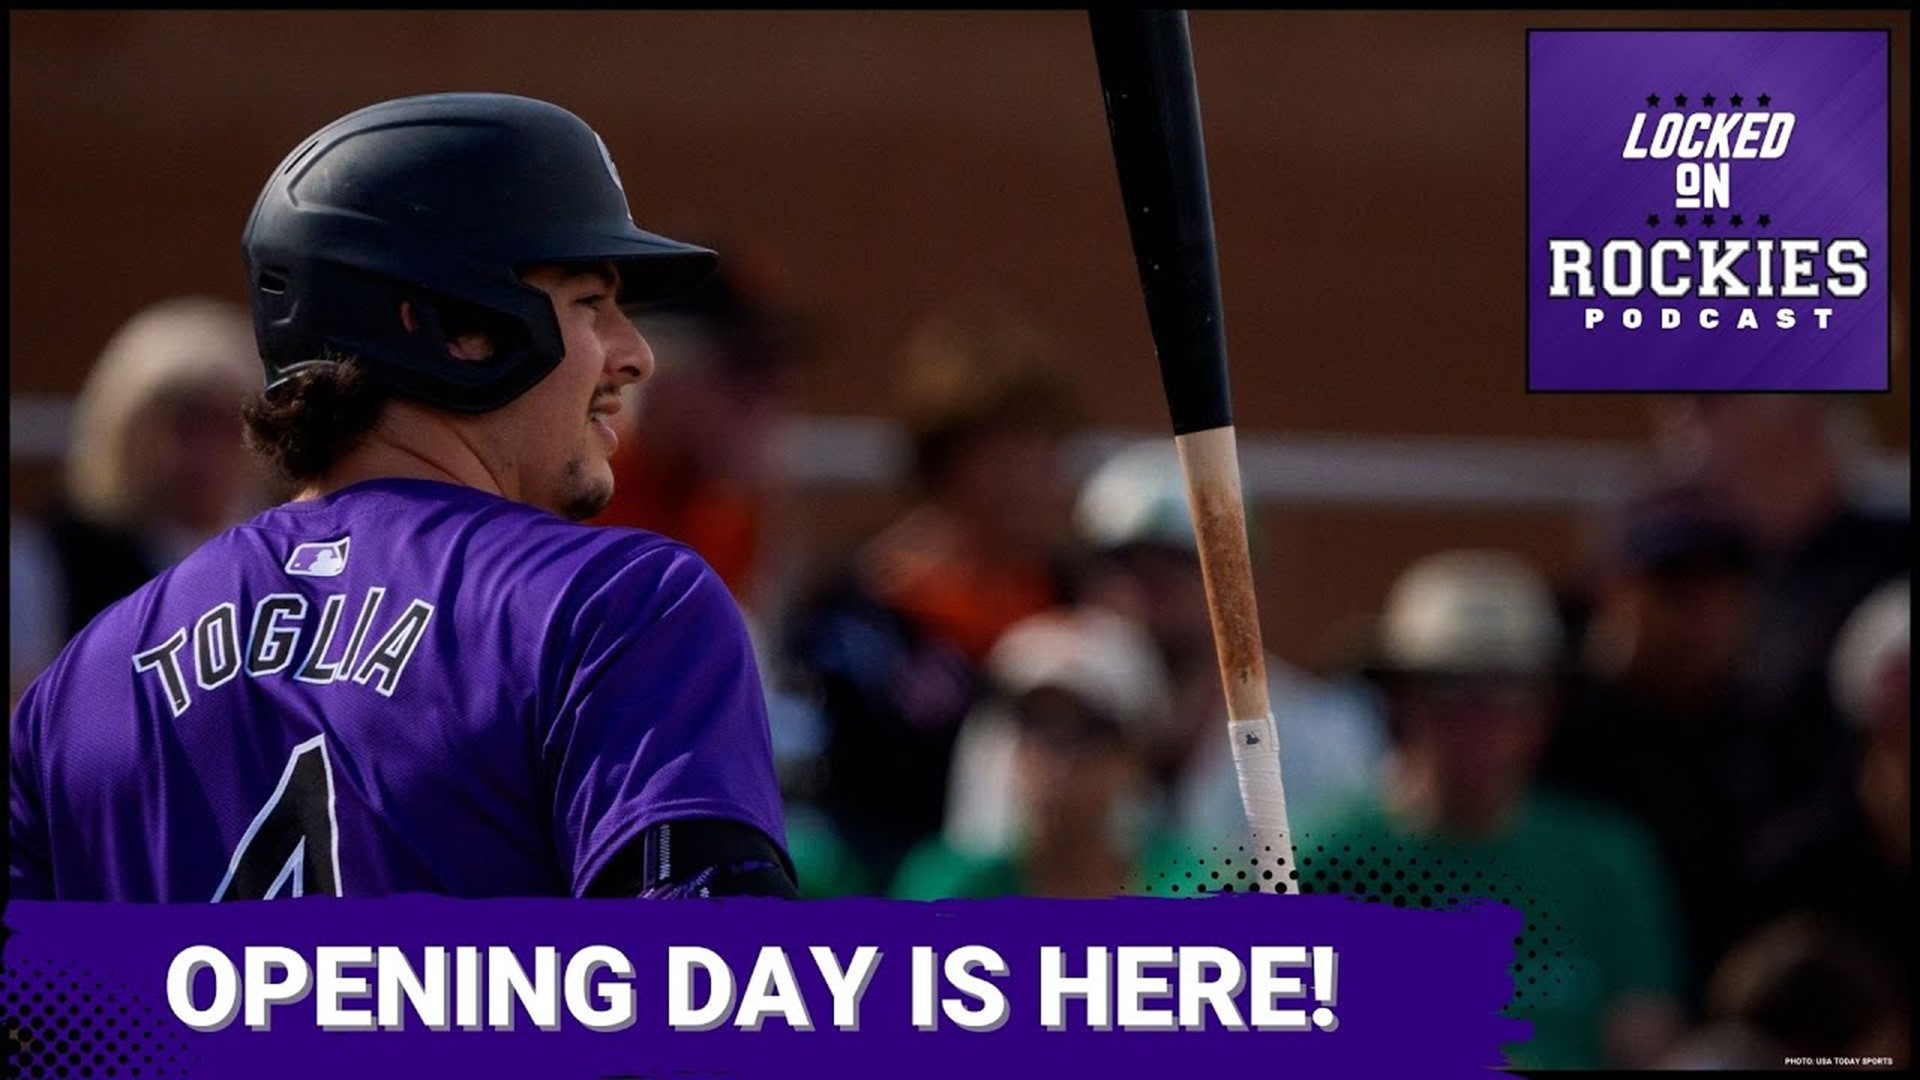 It's Opening Day for the Colorado Rockies!